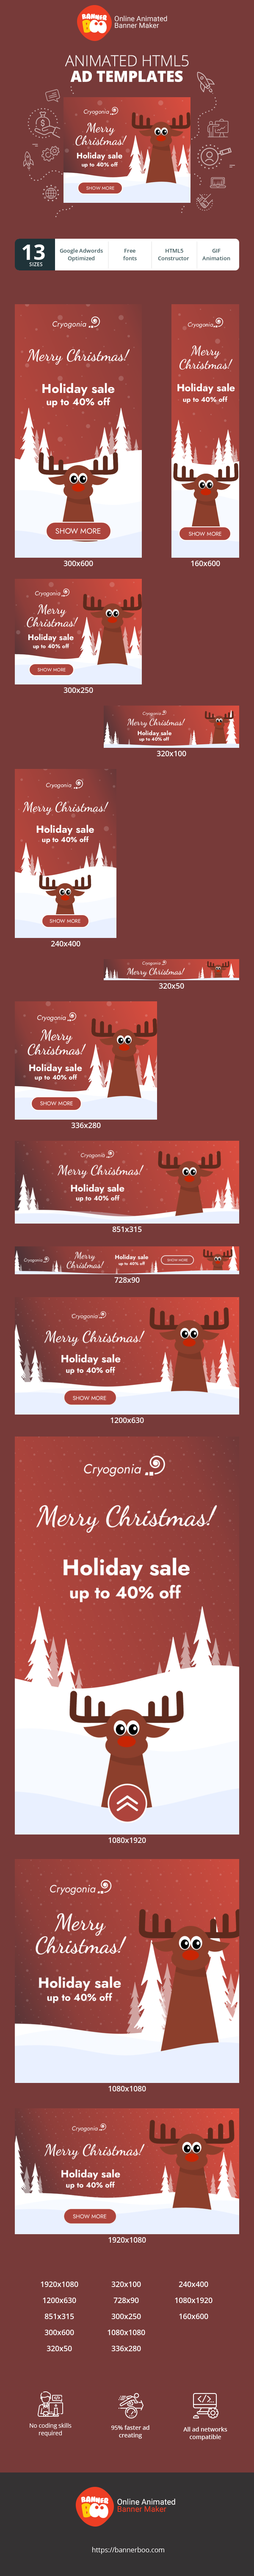 Banner ad template — Merry Christmas — Holiday Sale Up To 40% Off